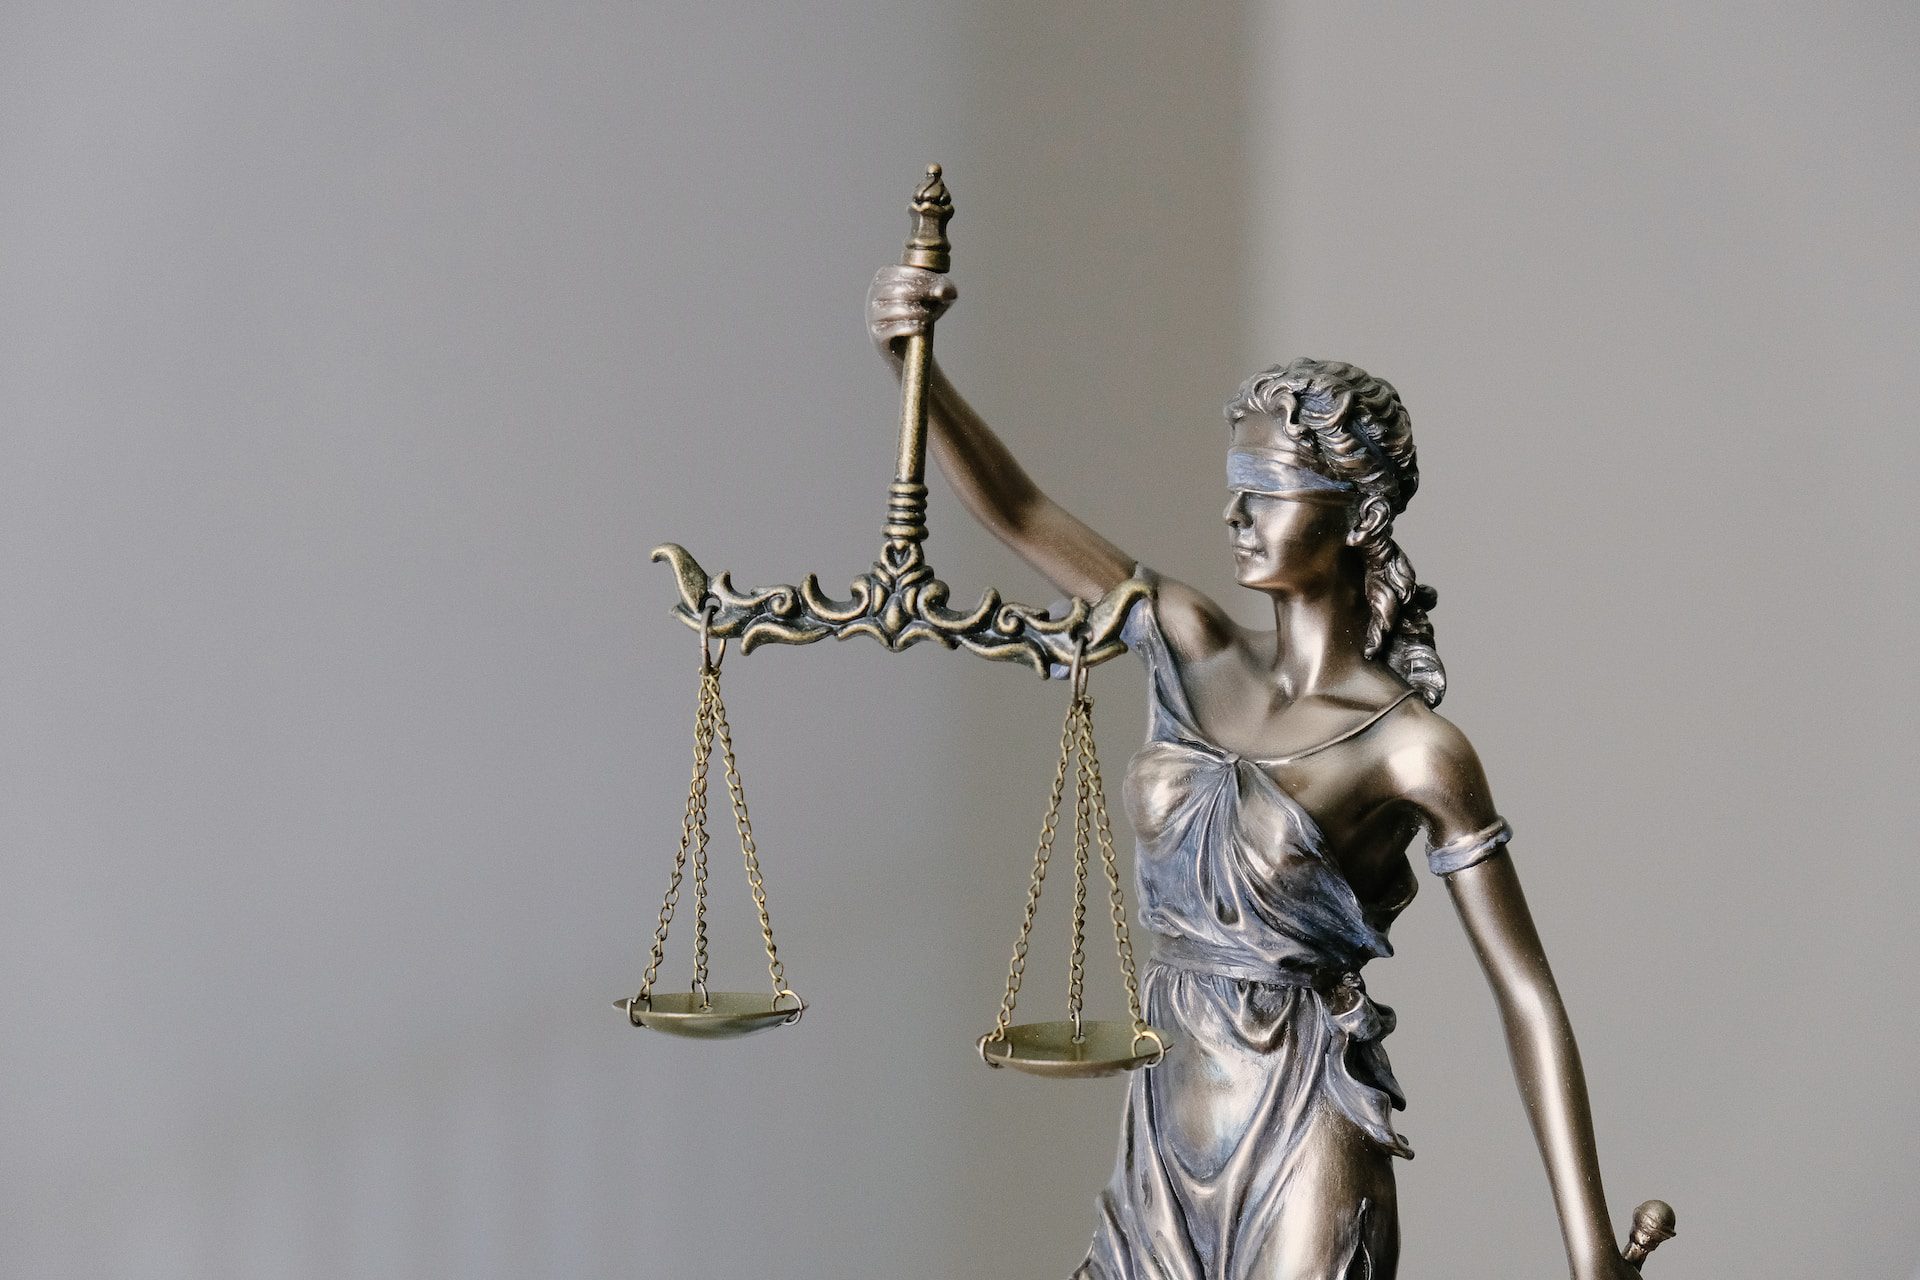 Image of a statue of the scales of justice.